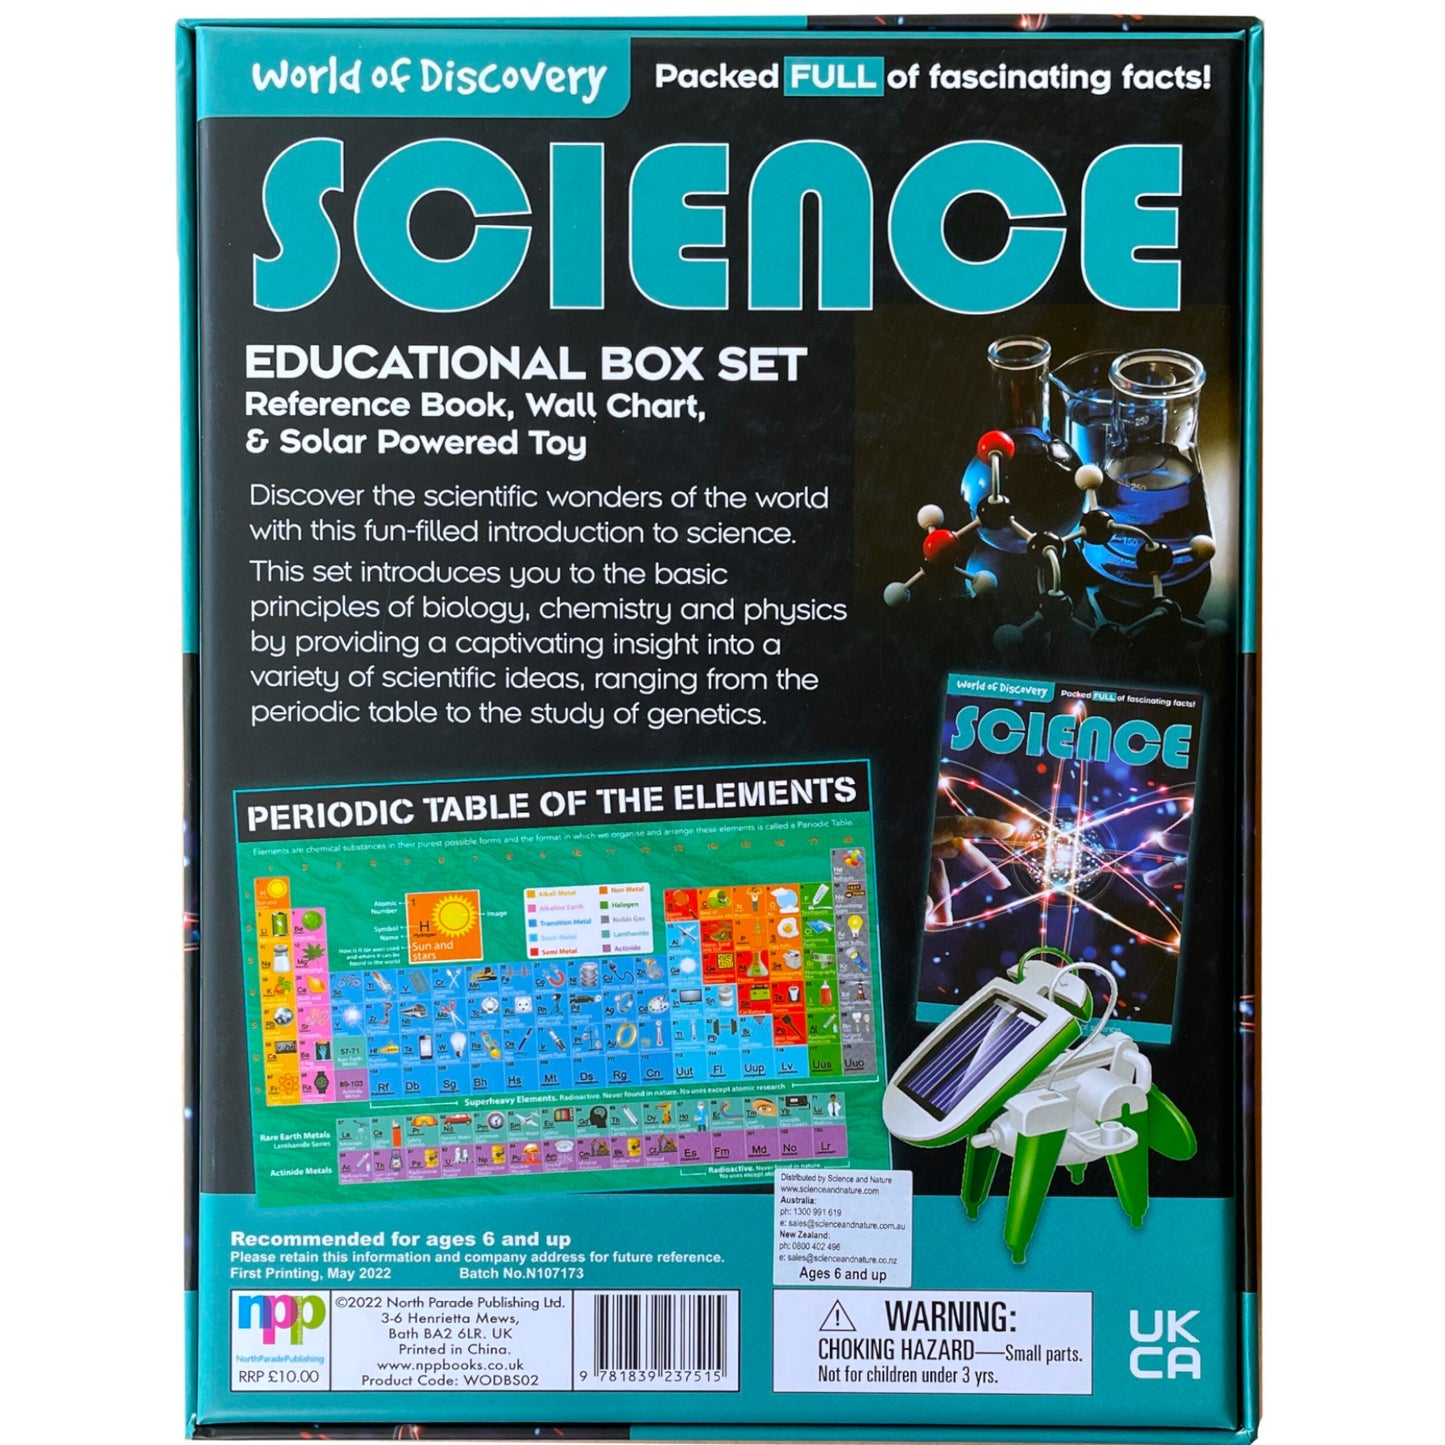 World of Discovery - Discover Science with Solar Powered Toy 1